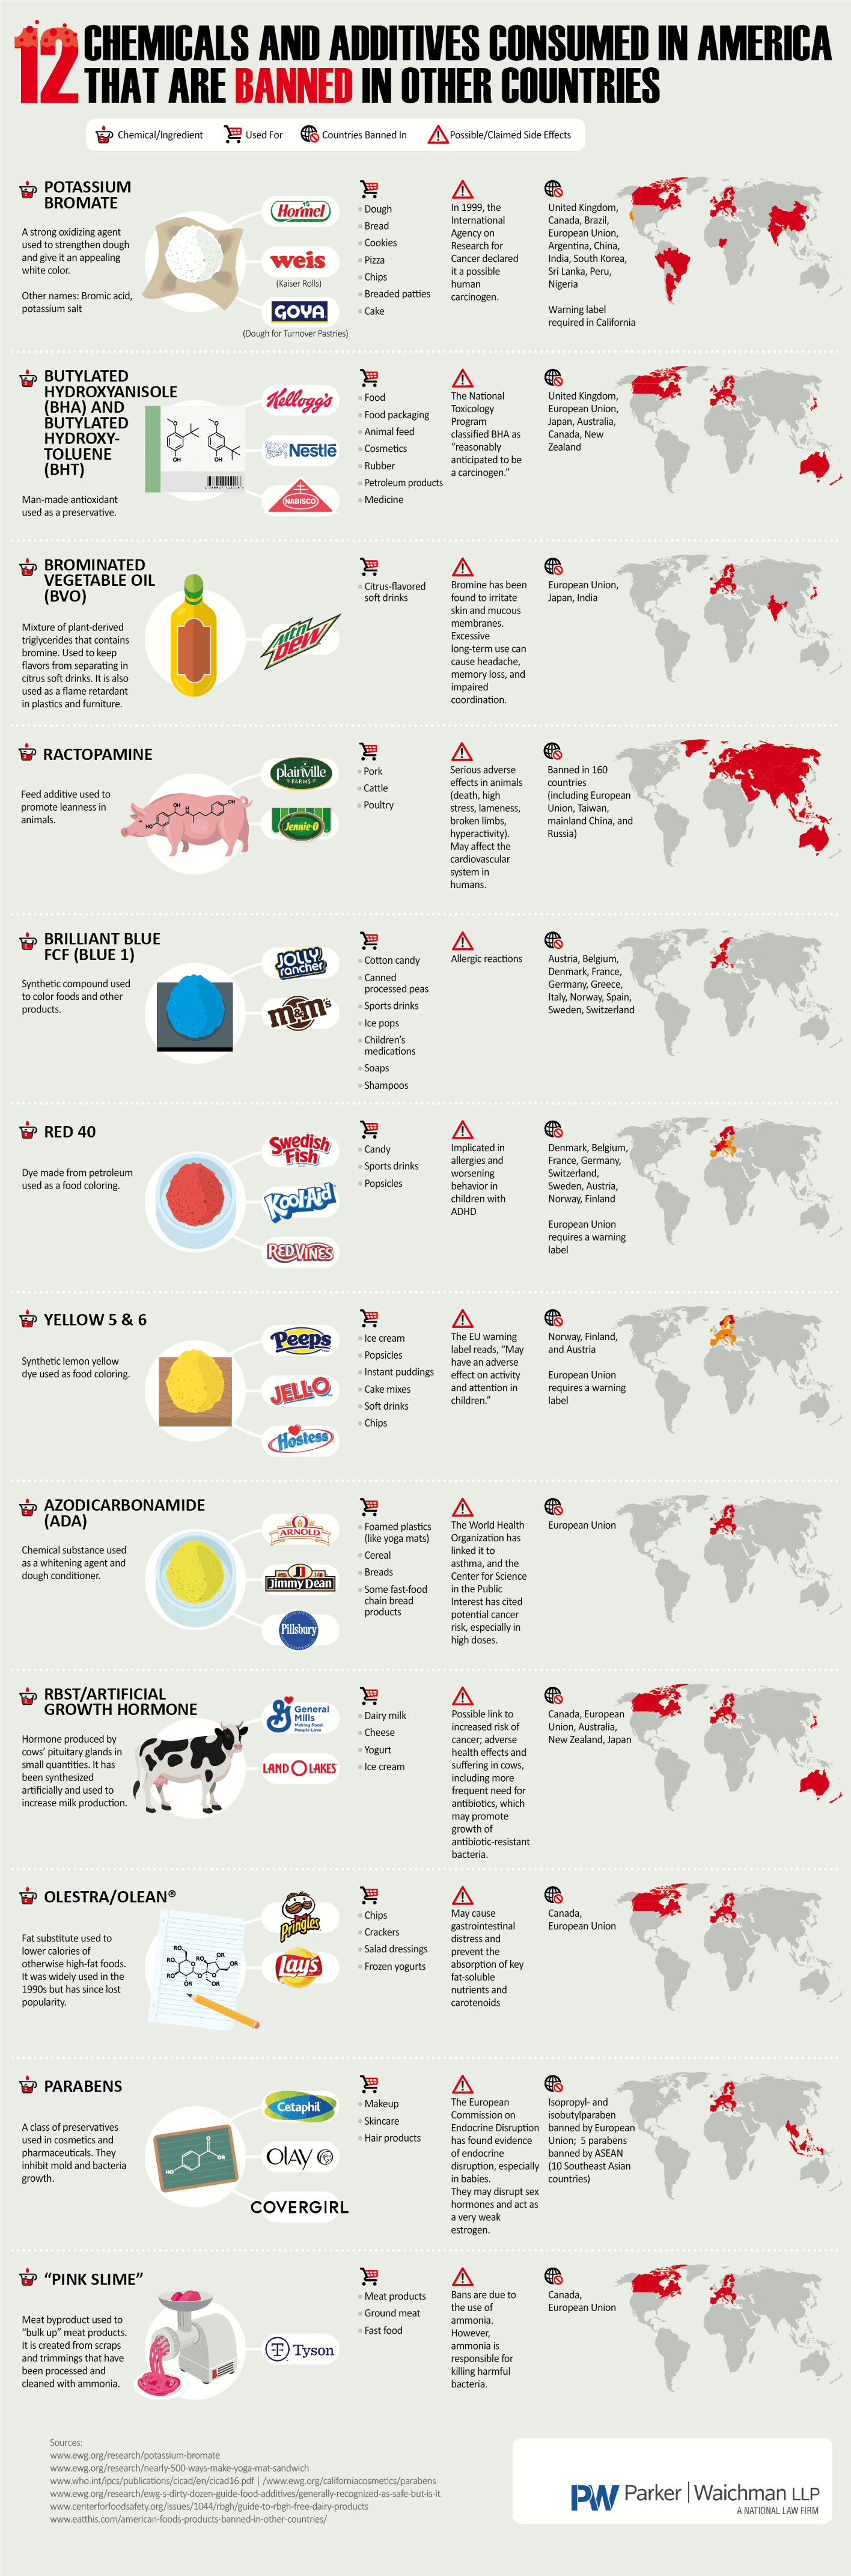 12 Chemicals and Additives Consumed in America That Are Banned in Other Countries